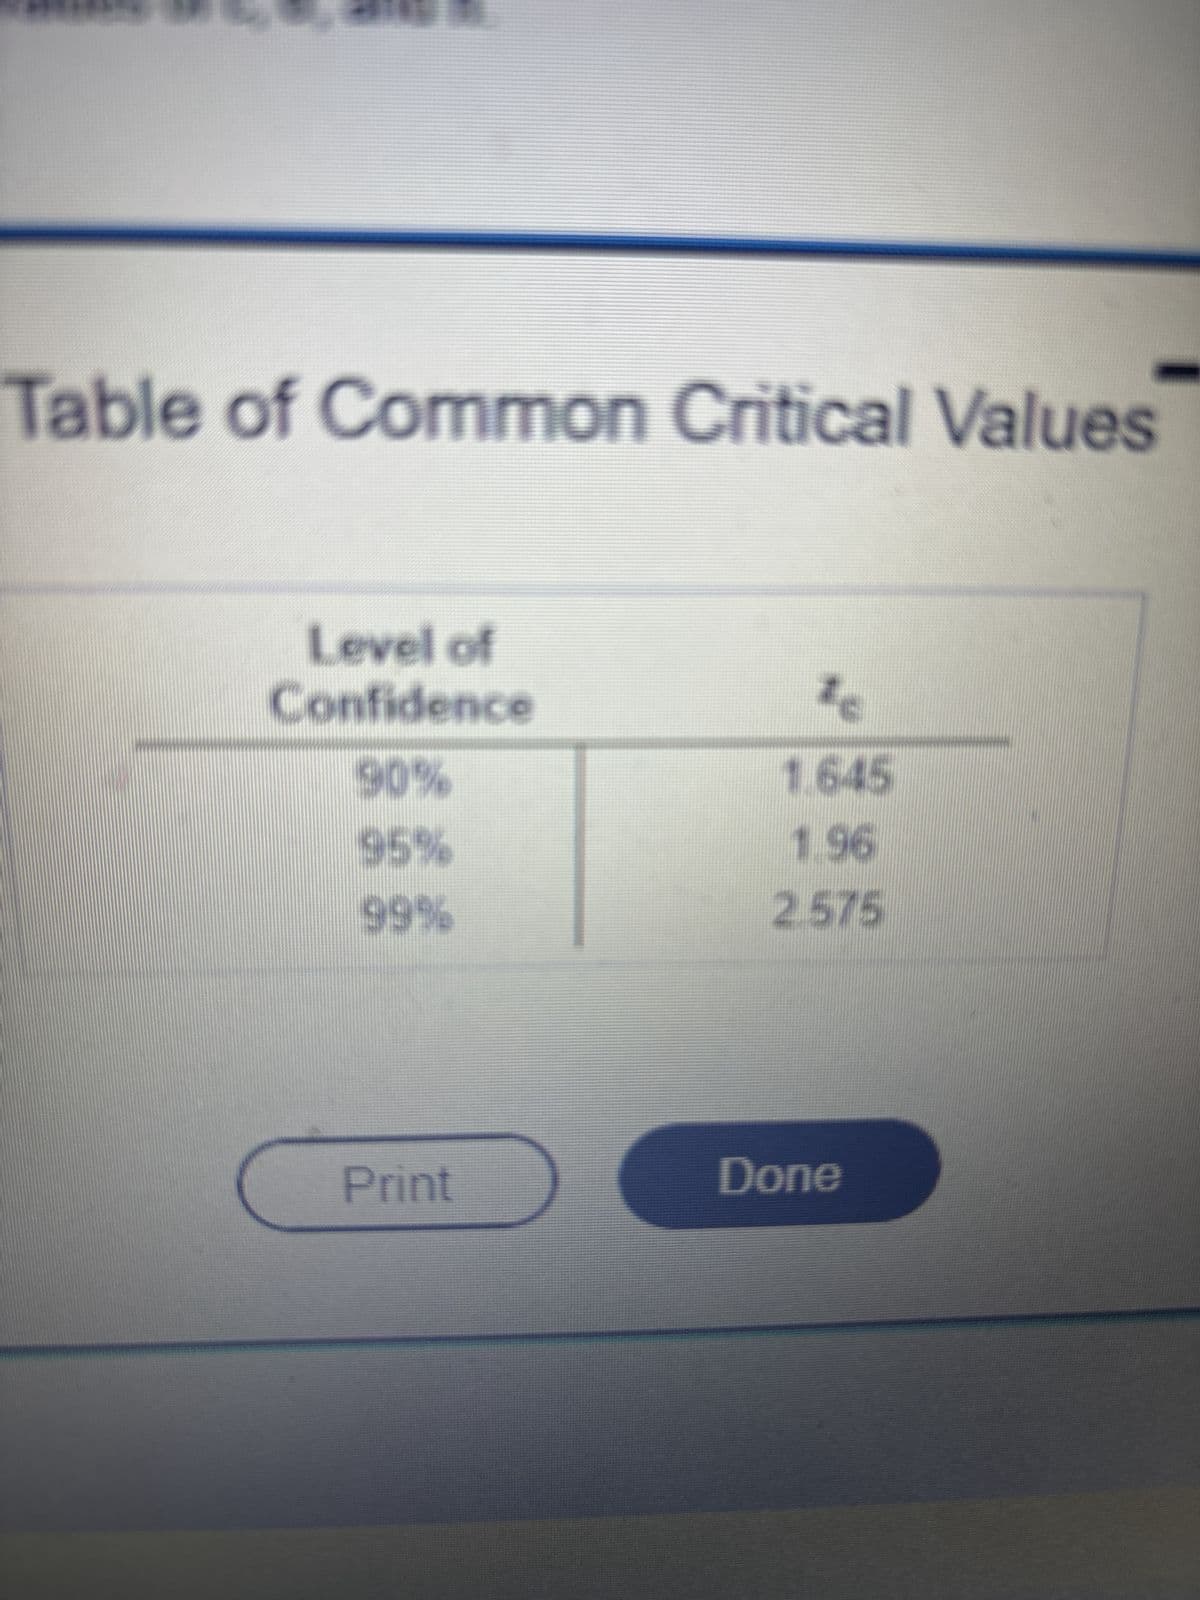 Table of Common Critical Values
Level of
Confidence
90%
1.645
95%
1.96
99%
2.575
Print
Done